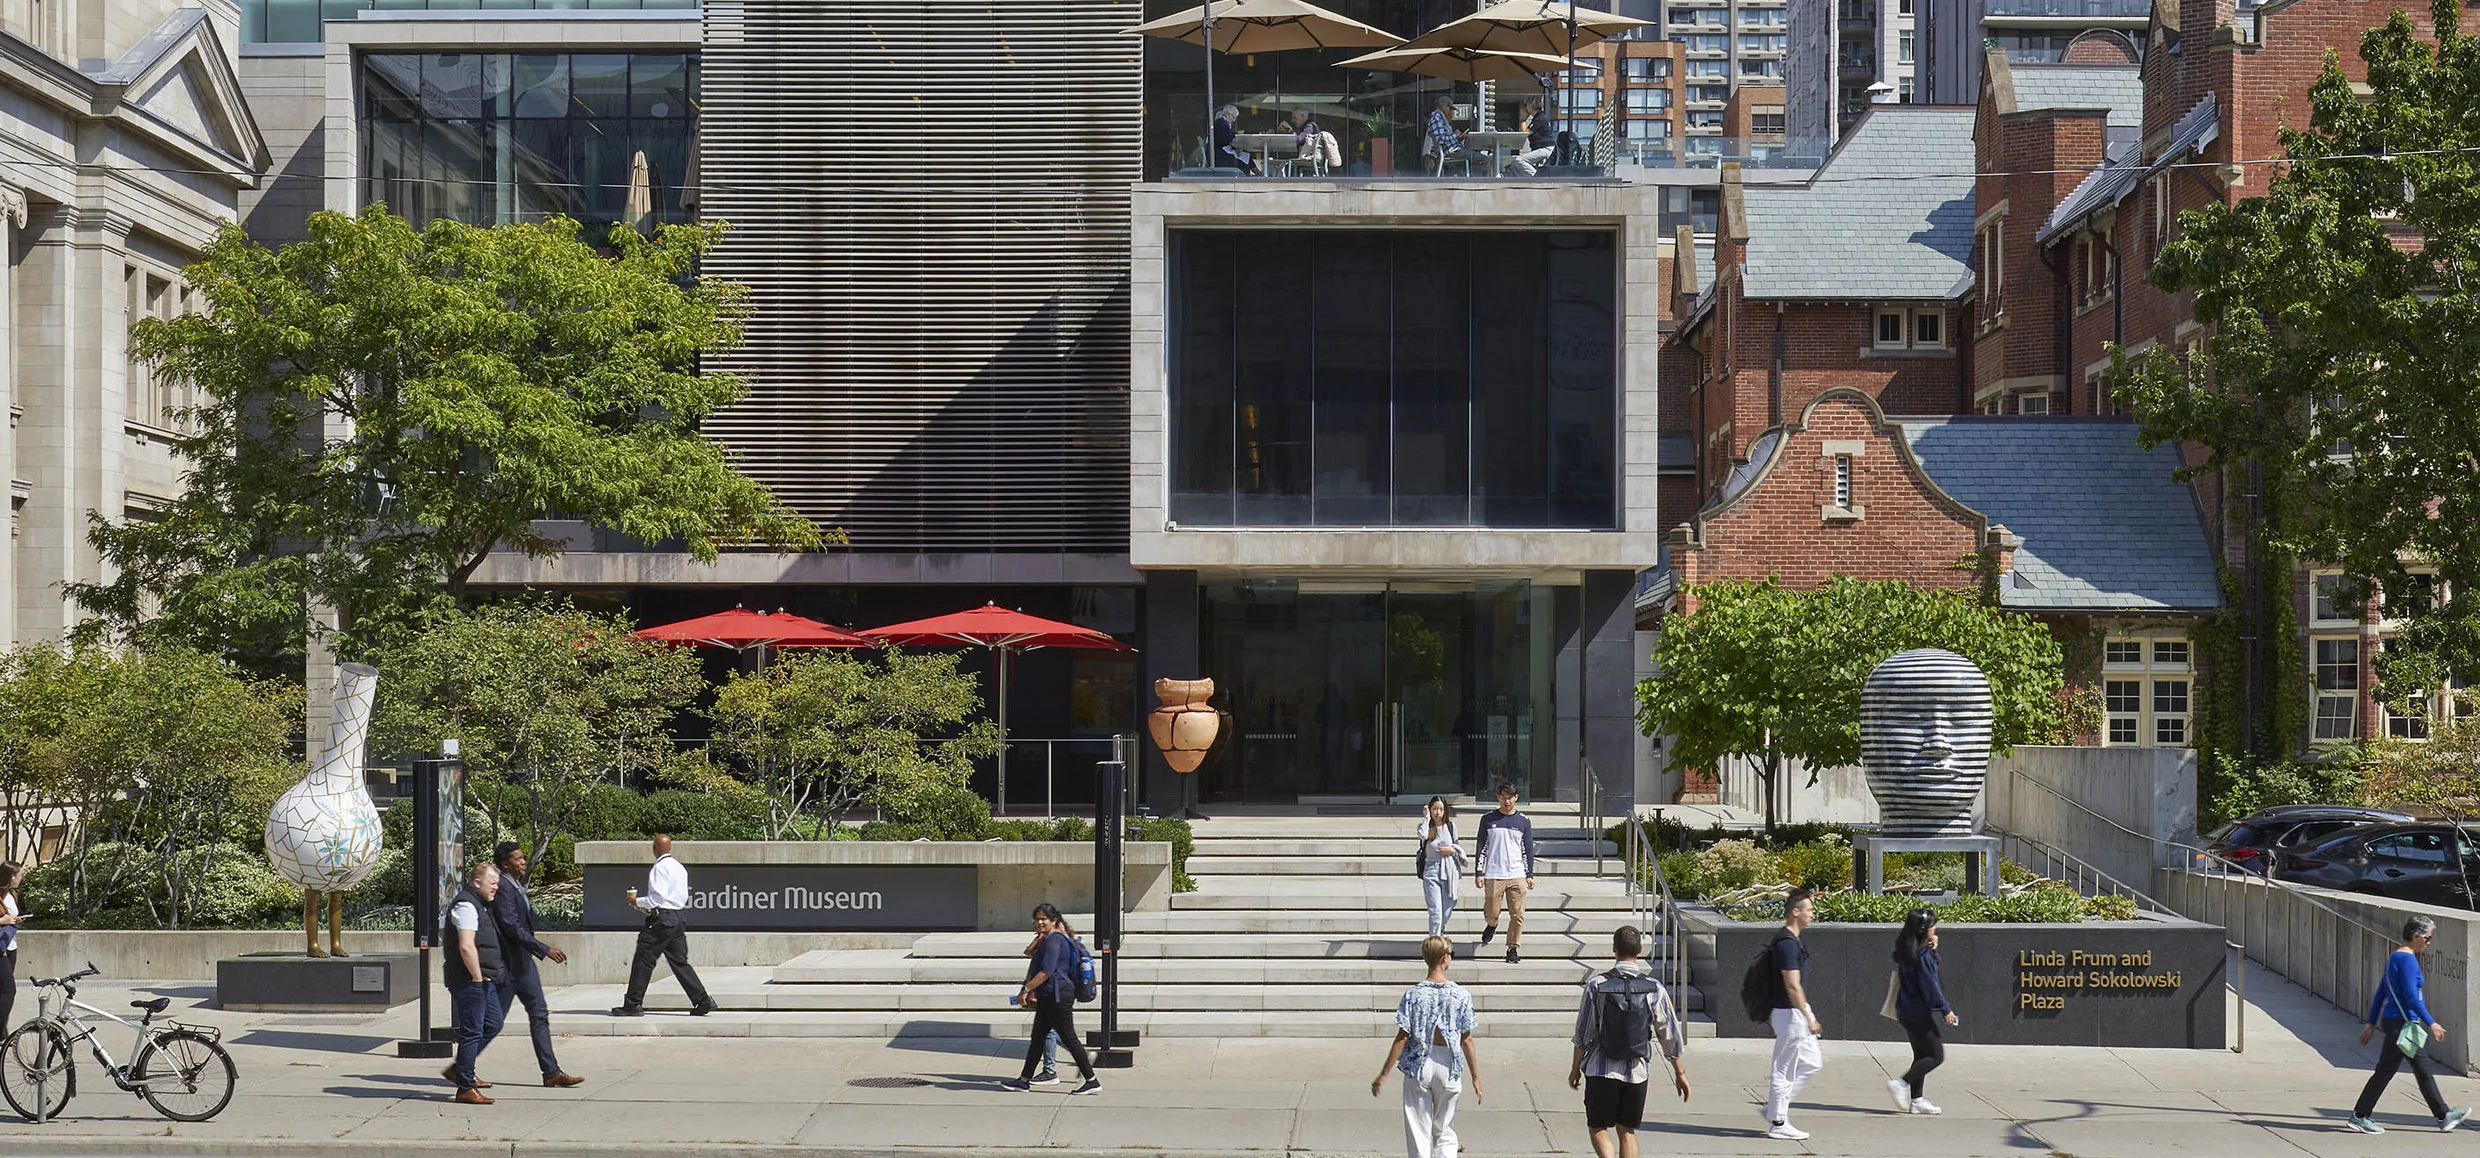 Exterior of the Gardiner Museum with people walking in front of the building